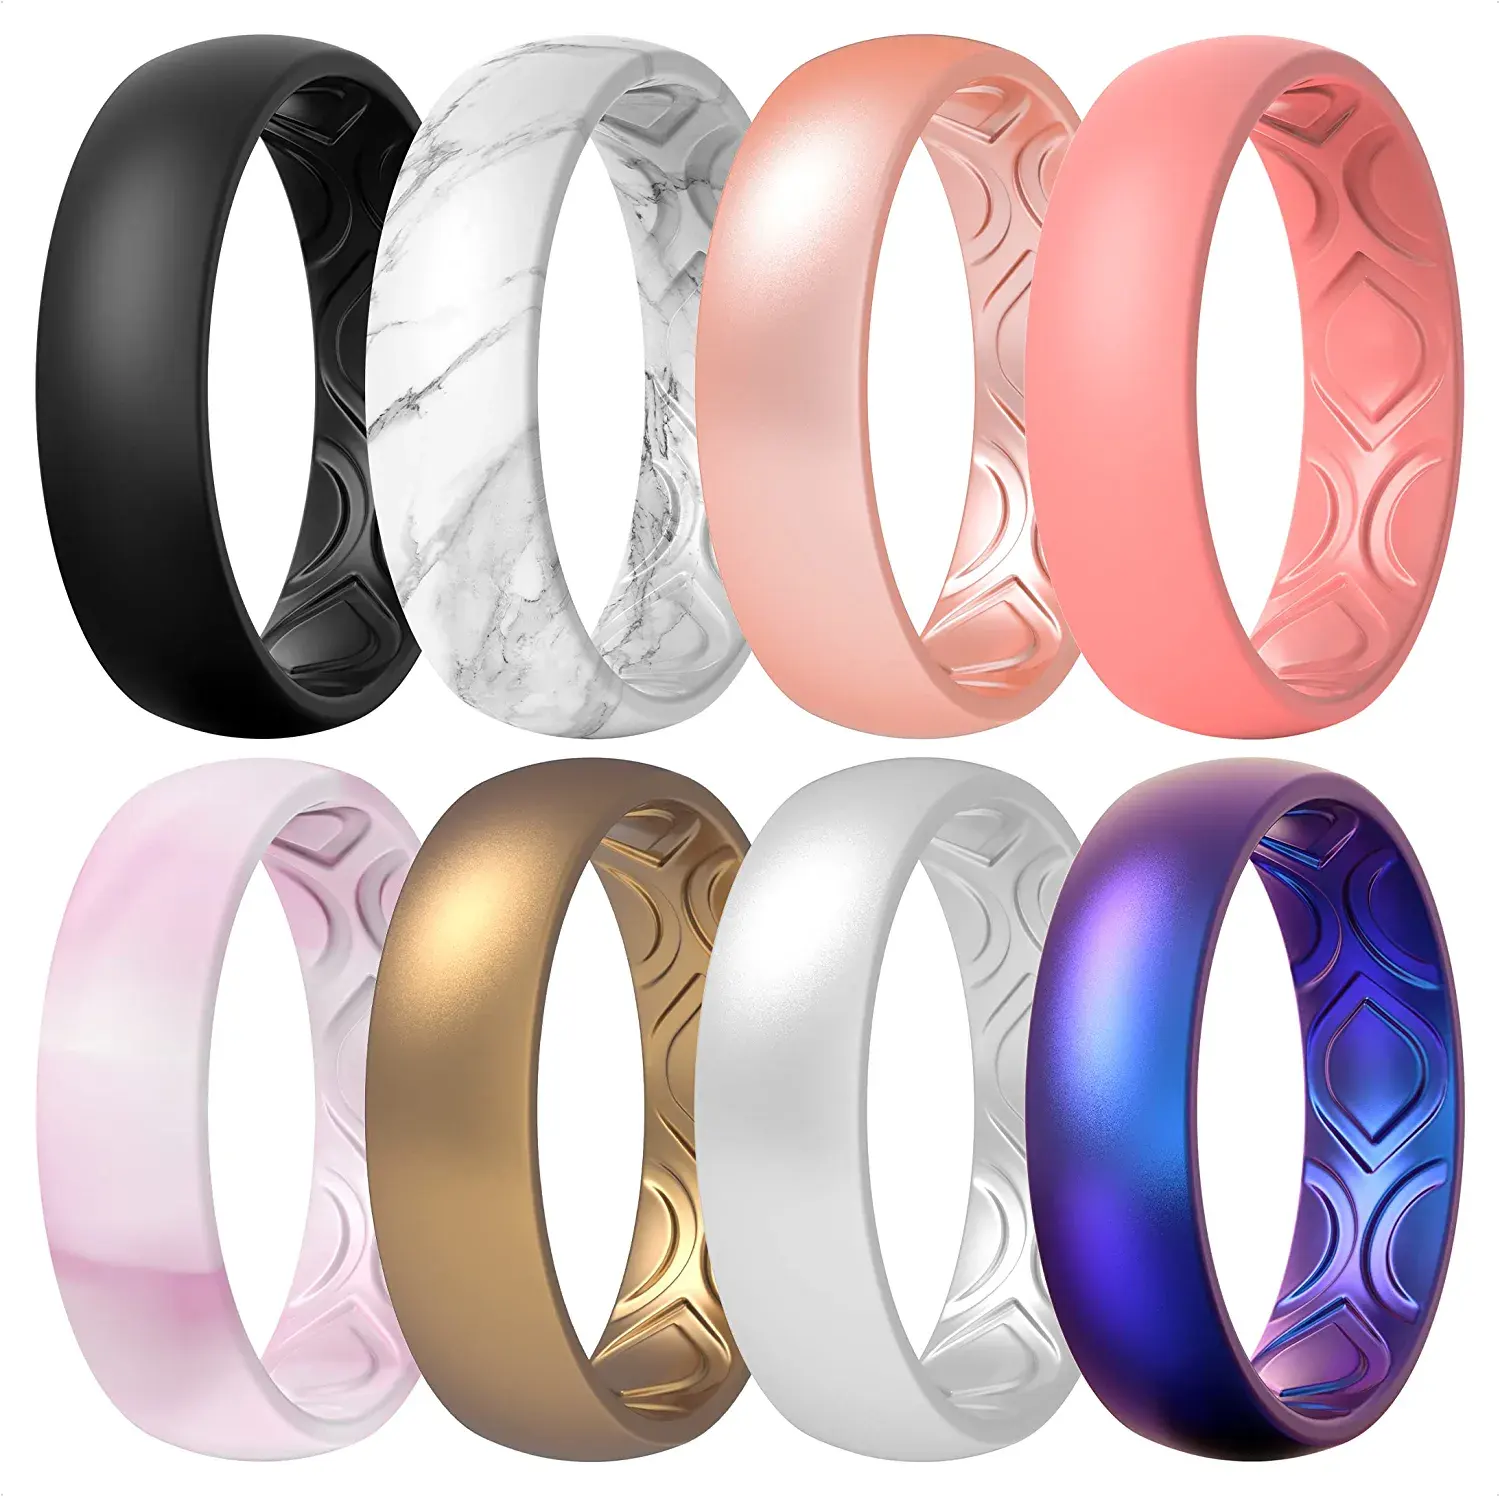 Hot Sale Silicone Wedding Ring Glow In The Dark Silicone Wedding Ring Best Seller Flexible Women Silicone Rings Wedding